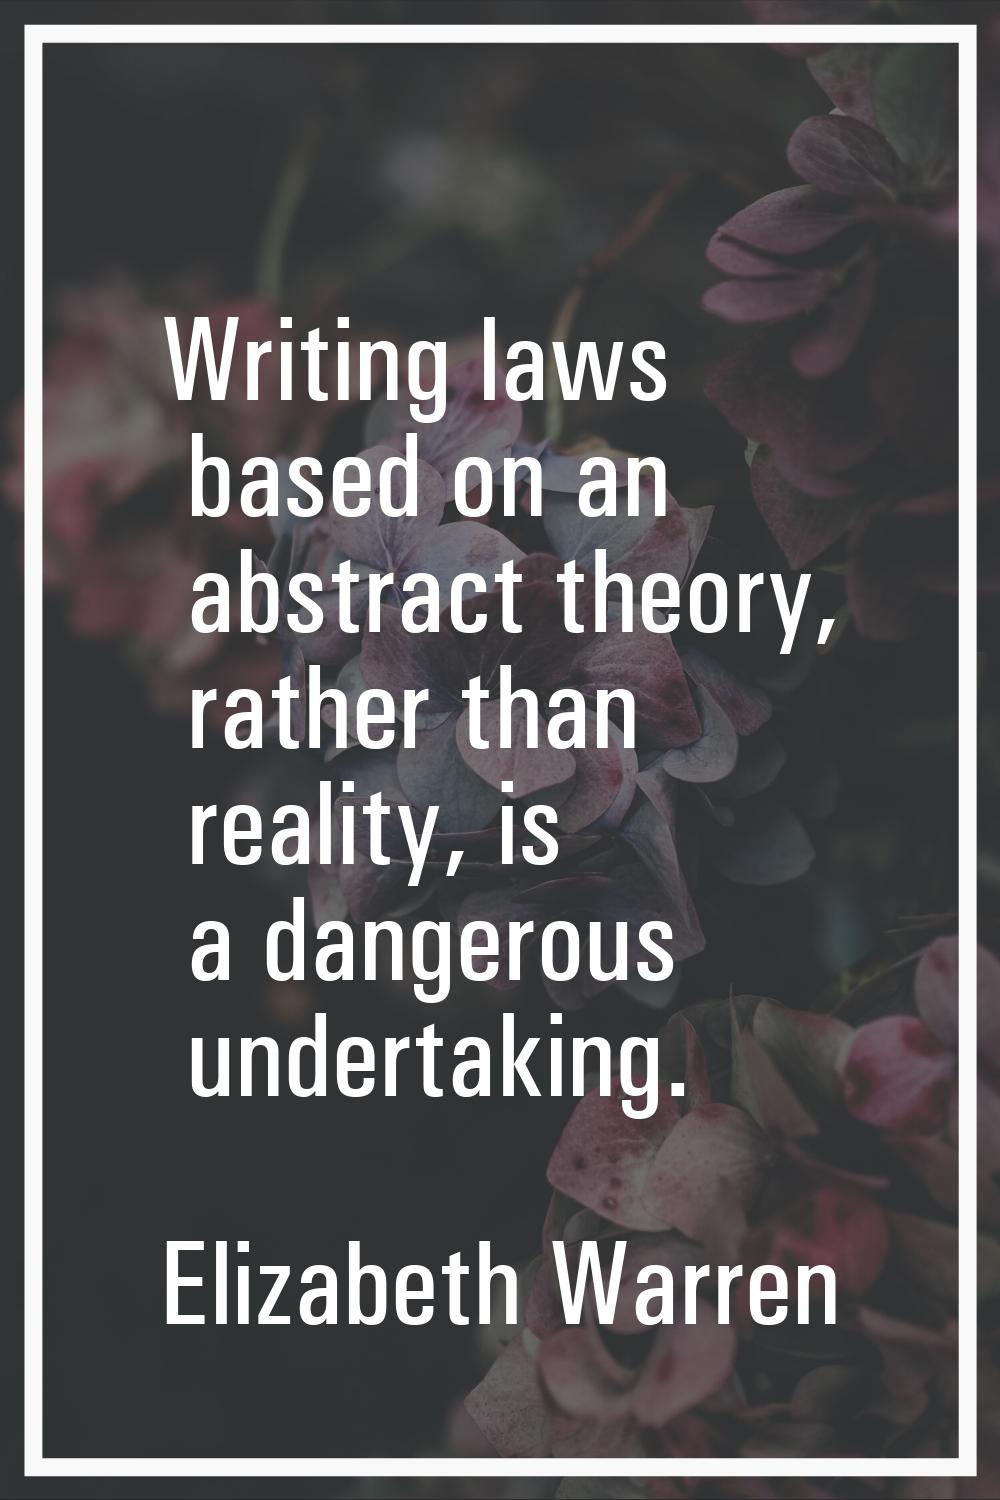 Writing laws based on an abstract theory, rather than reality, is a dangerous undertaking.